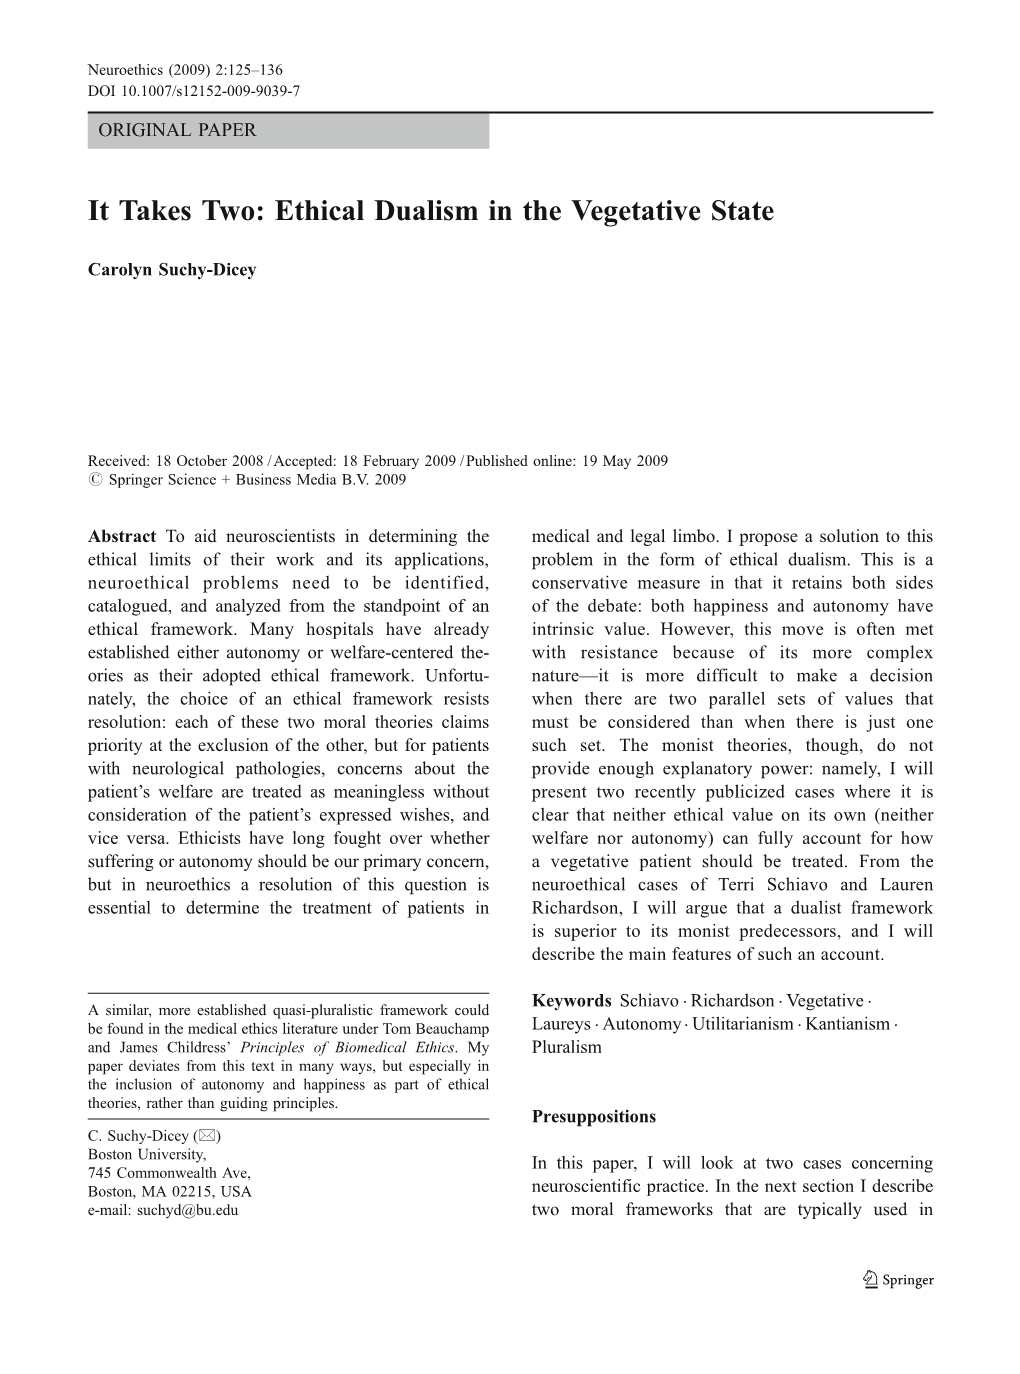 It Takes Two: Ethical Dualism in the Vegetative State